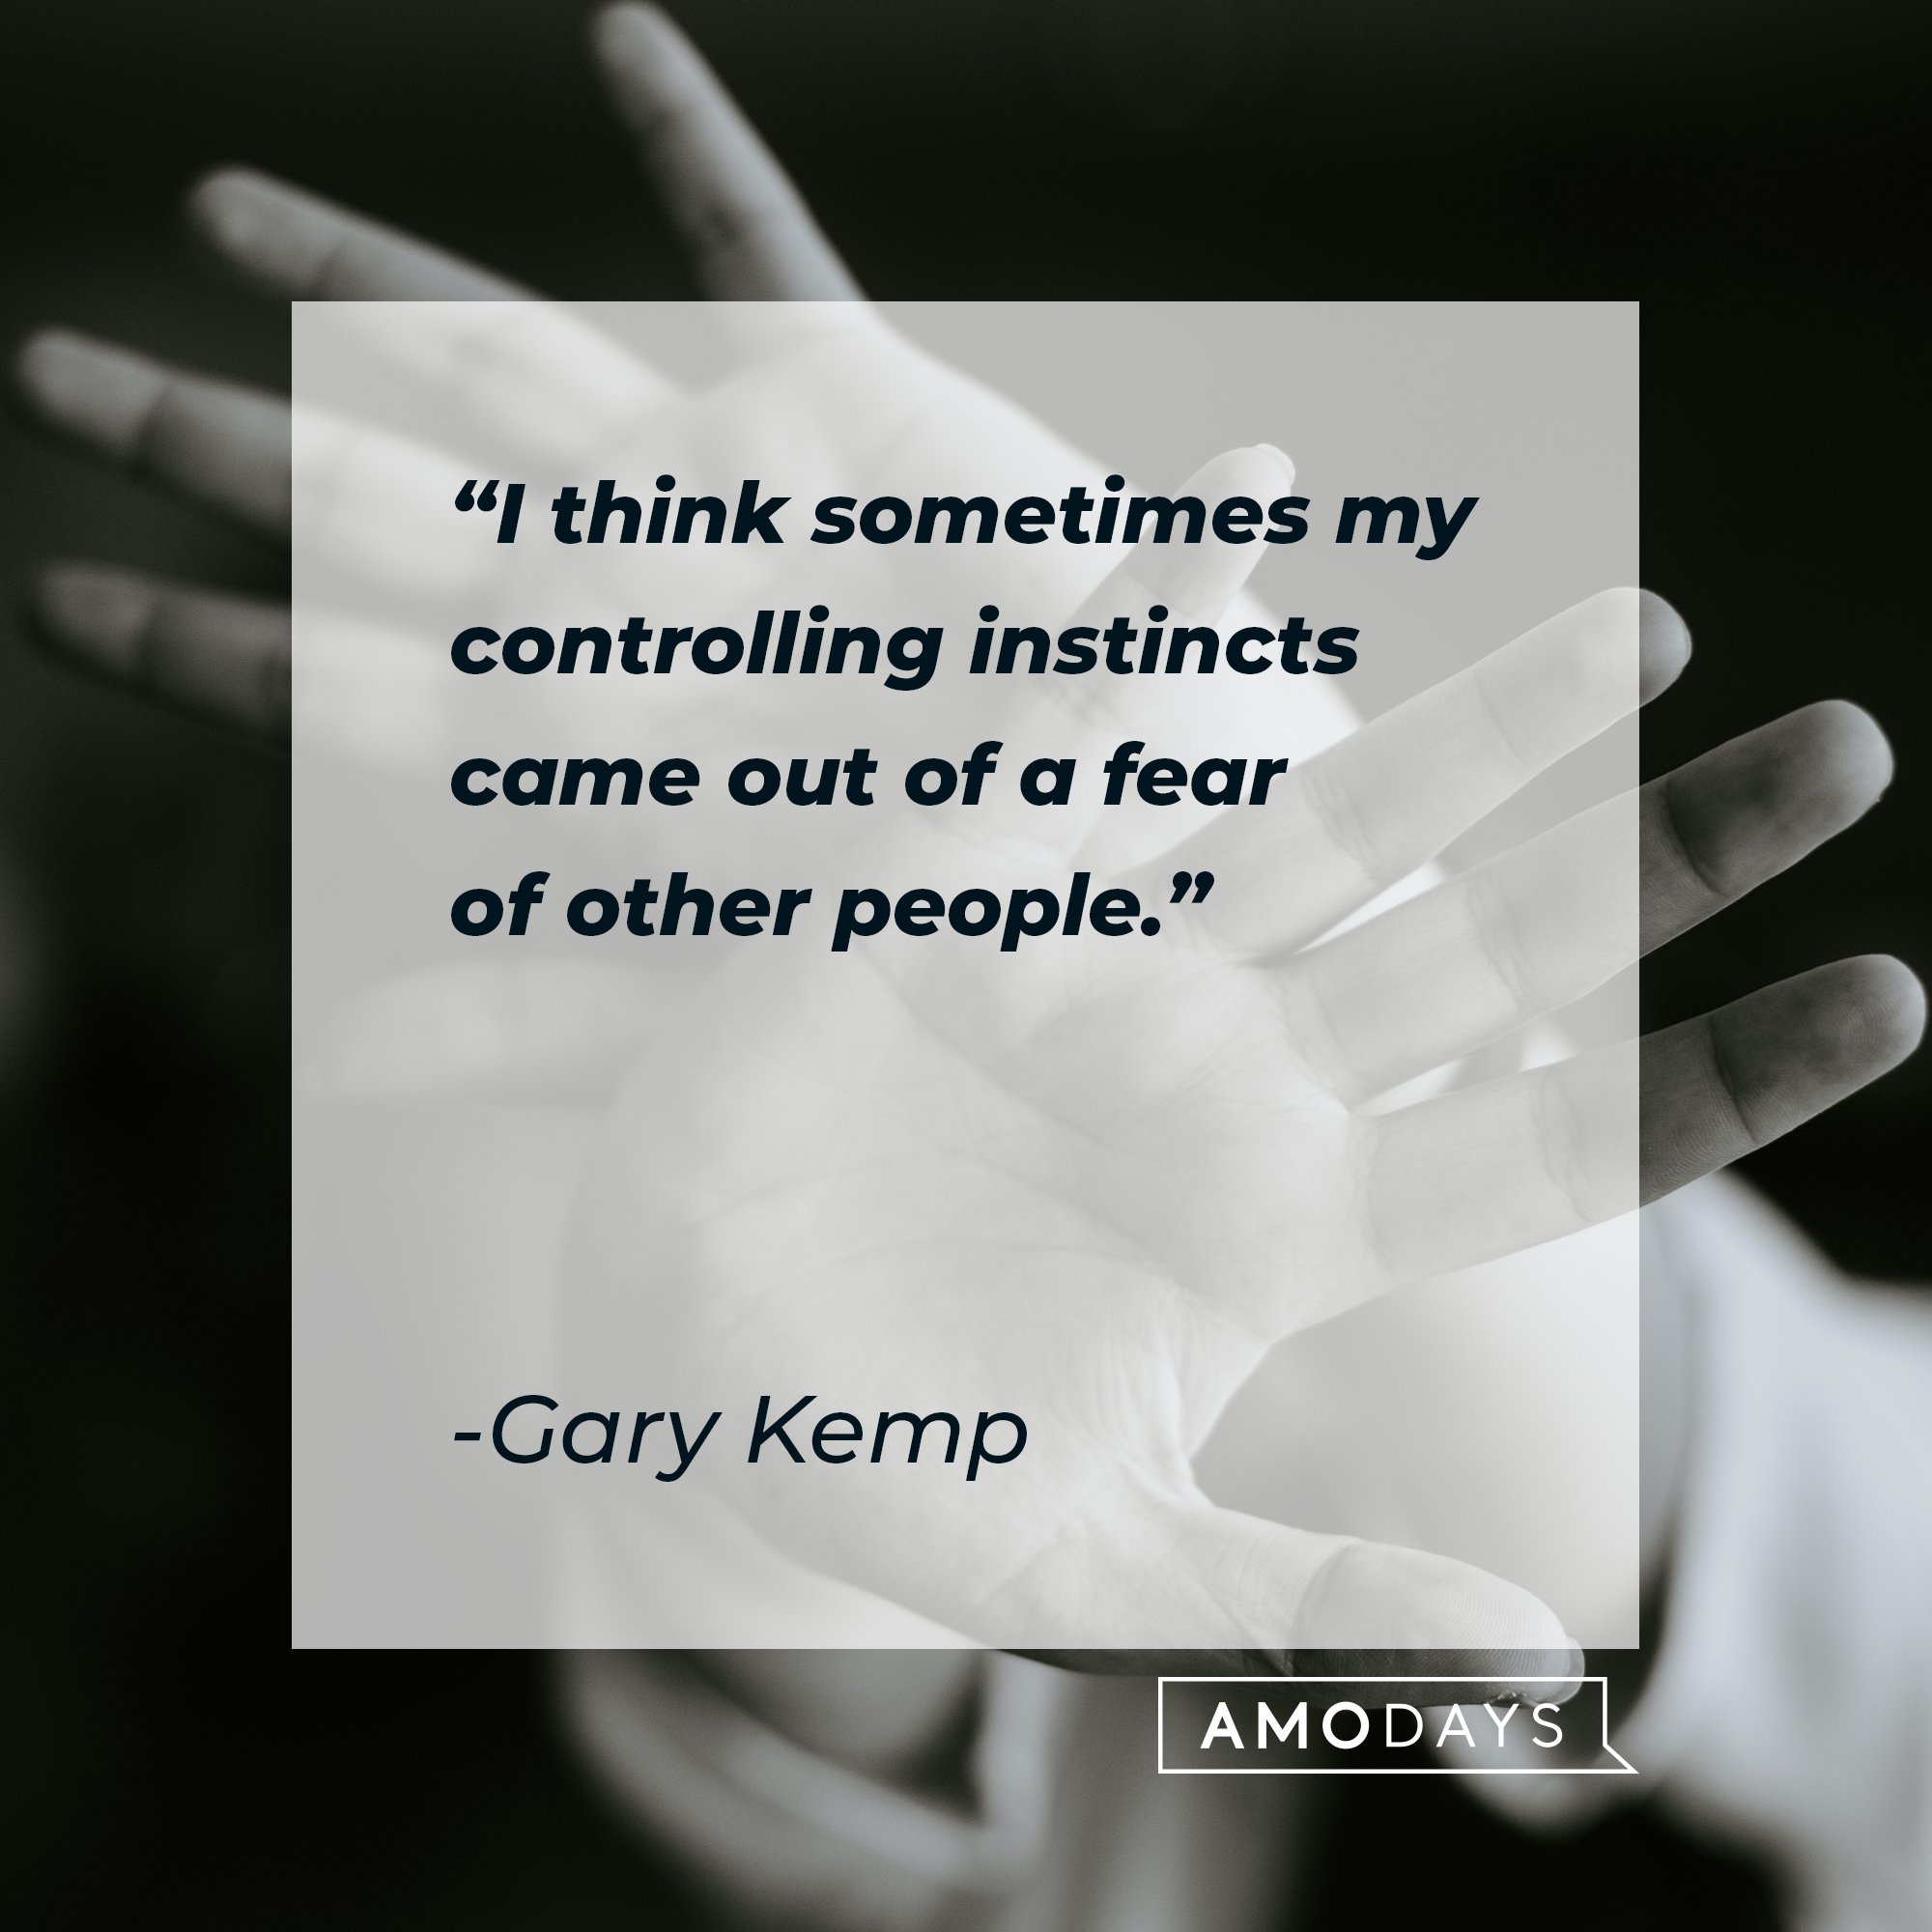 Gary Kemp's quote: "I think sometimes my controlling instincts came out of a fear of other people." | Image: AmoDays